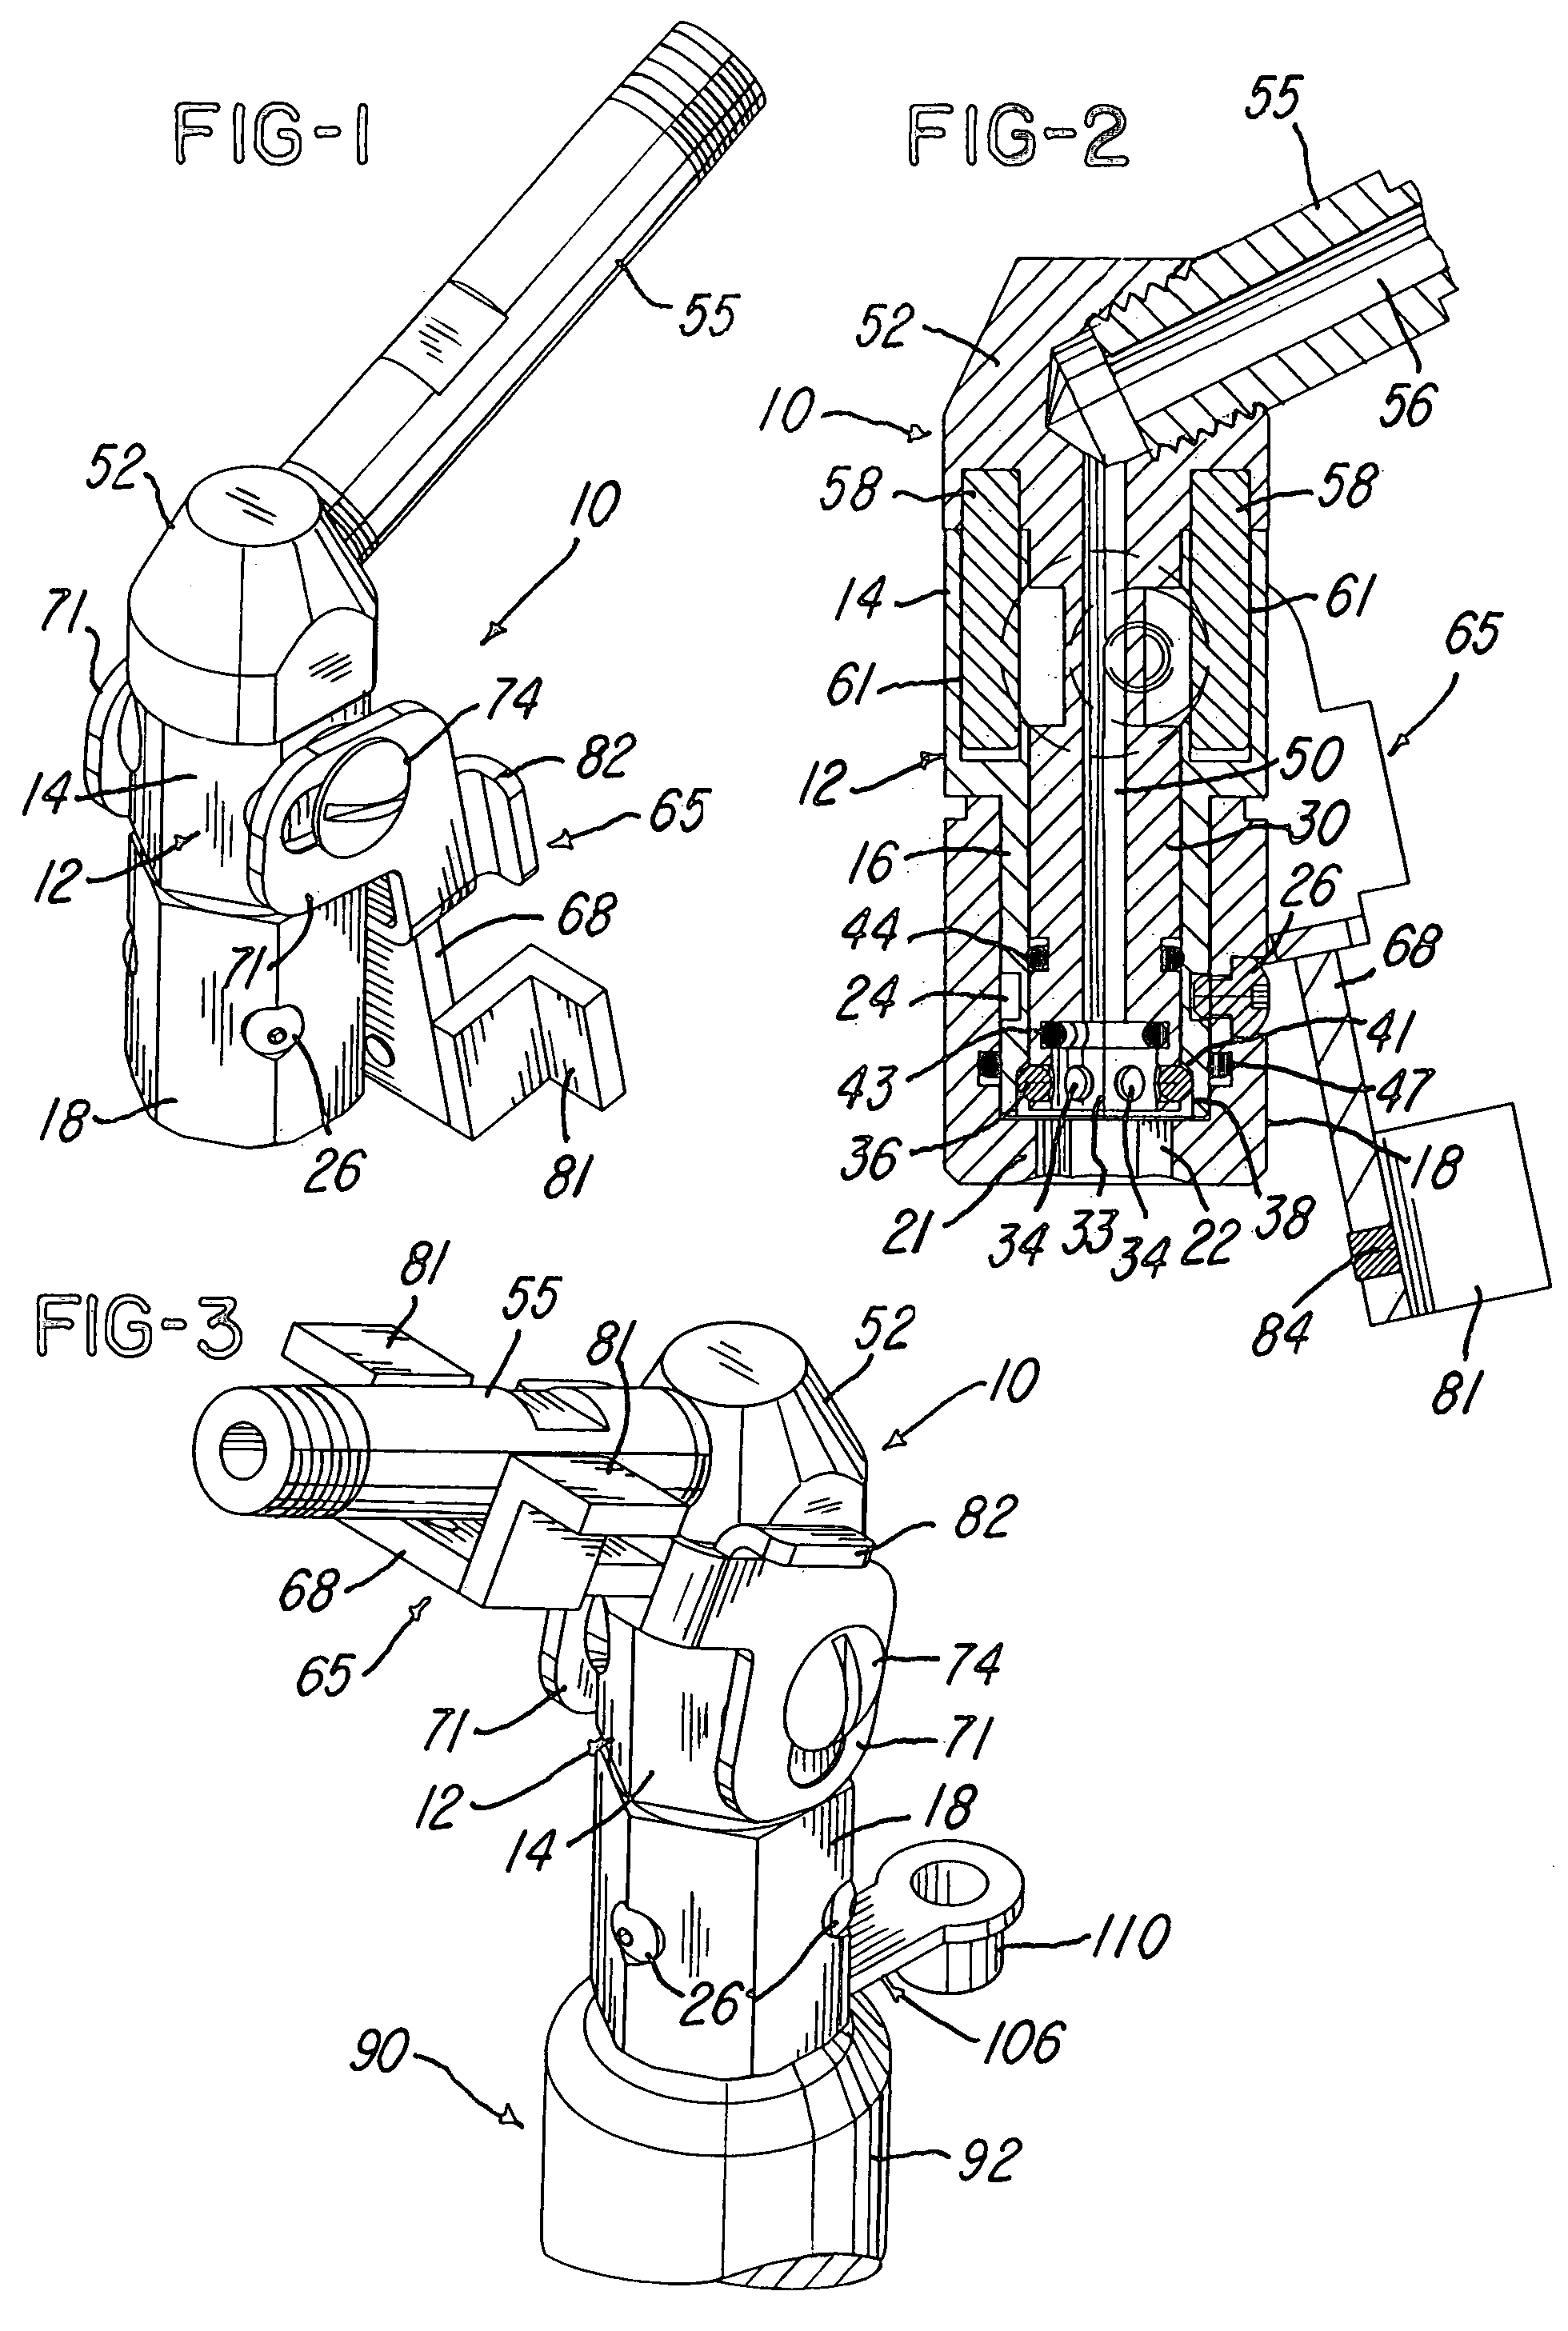 Tool assembly for evacuating, vacuum testing and charging a fluid system through a bleeder valve